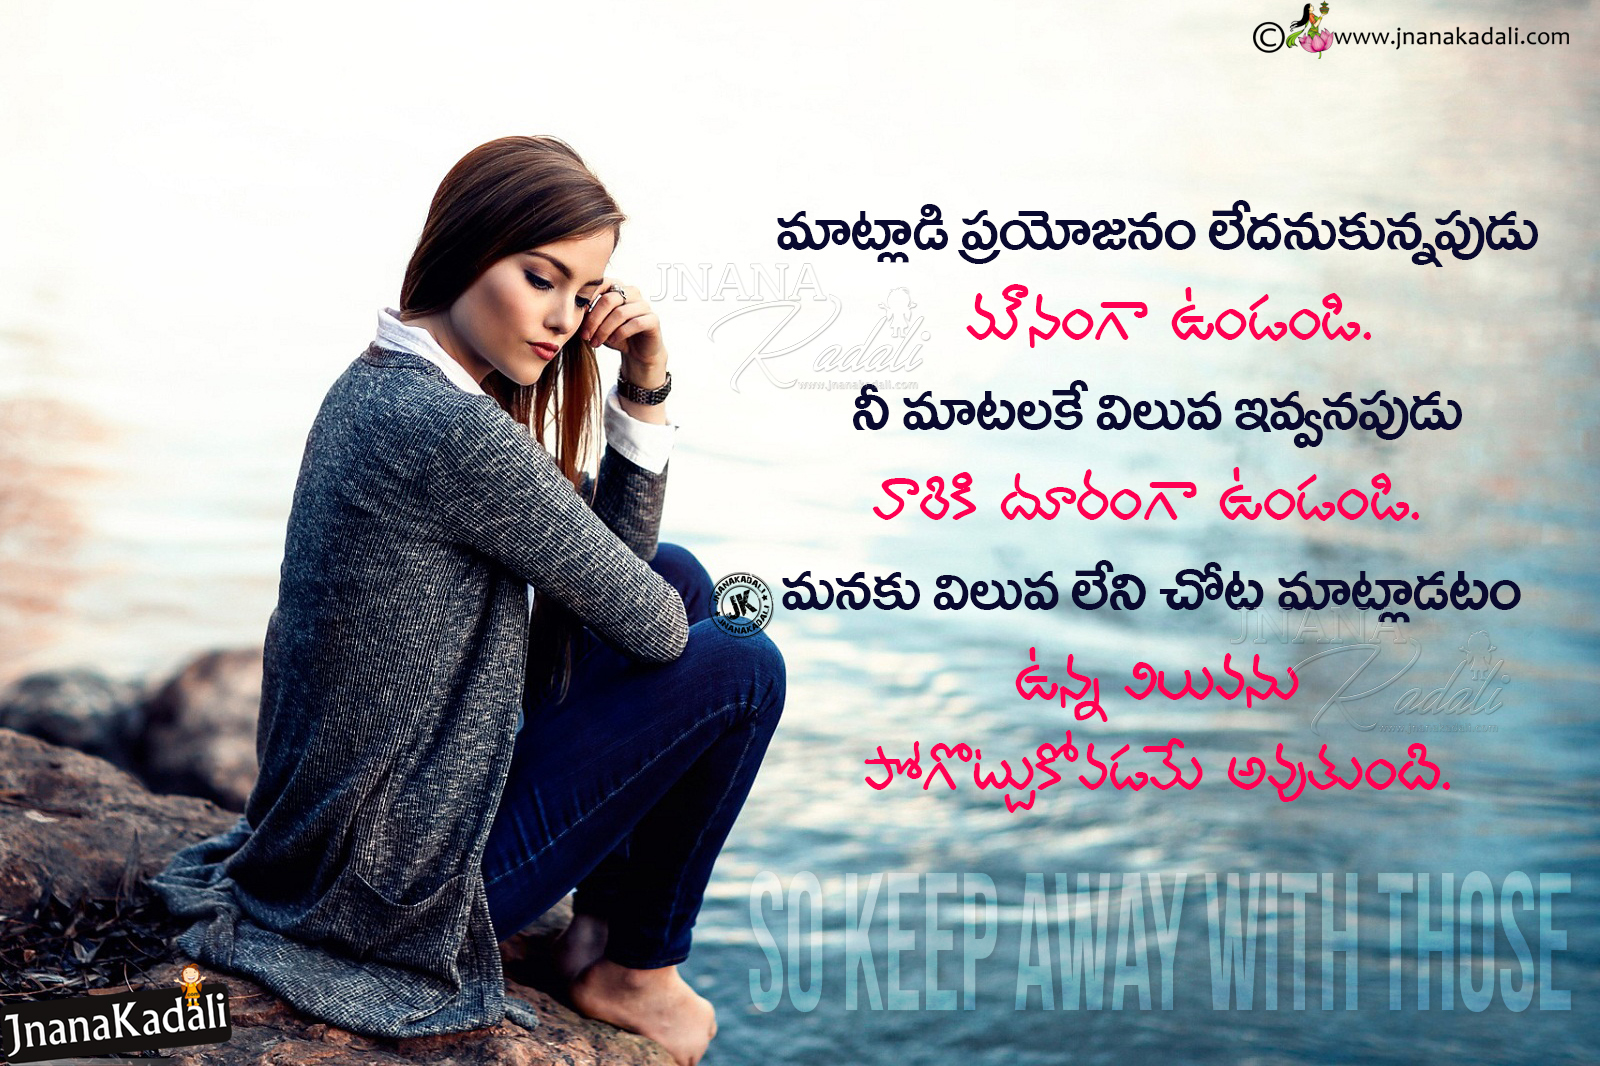 Keep Calm On Unnecessary Issues In Telugu, Best Words - HD Wallpaper 